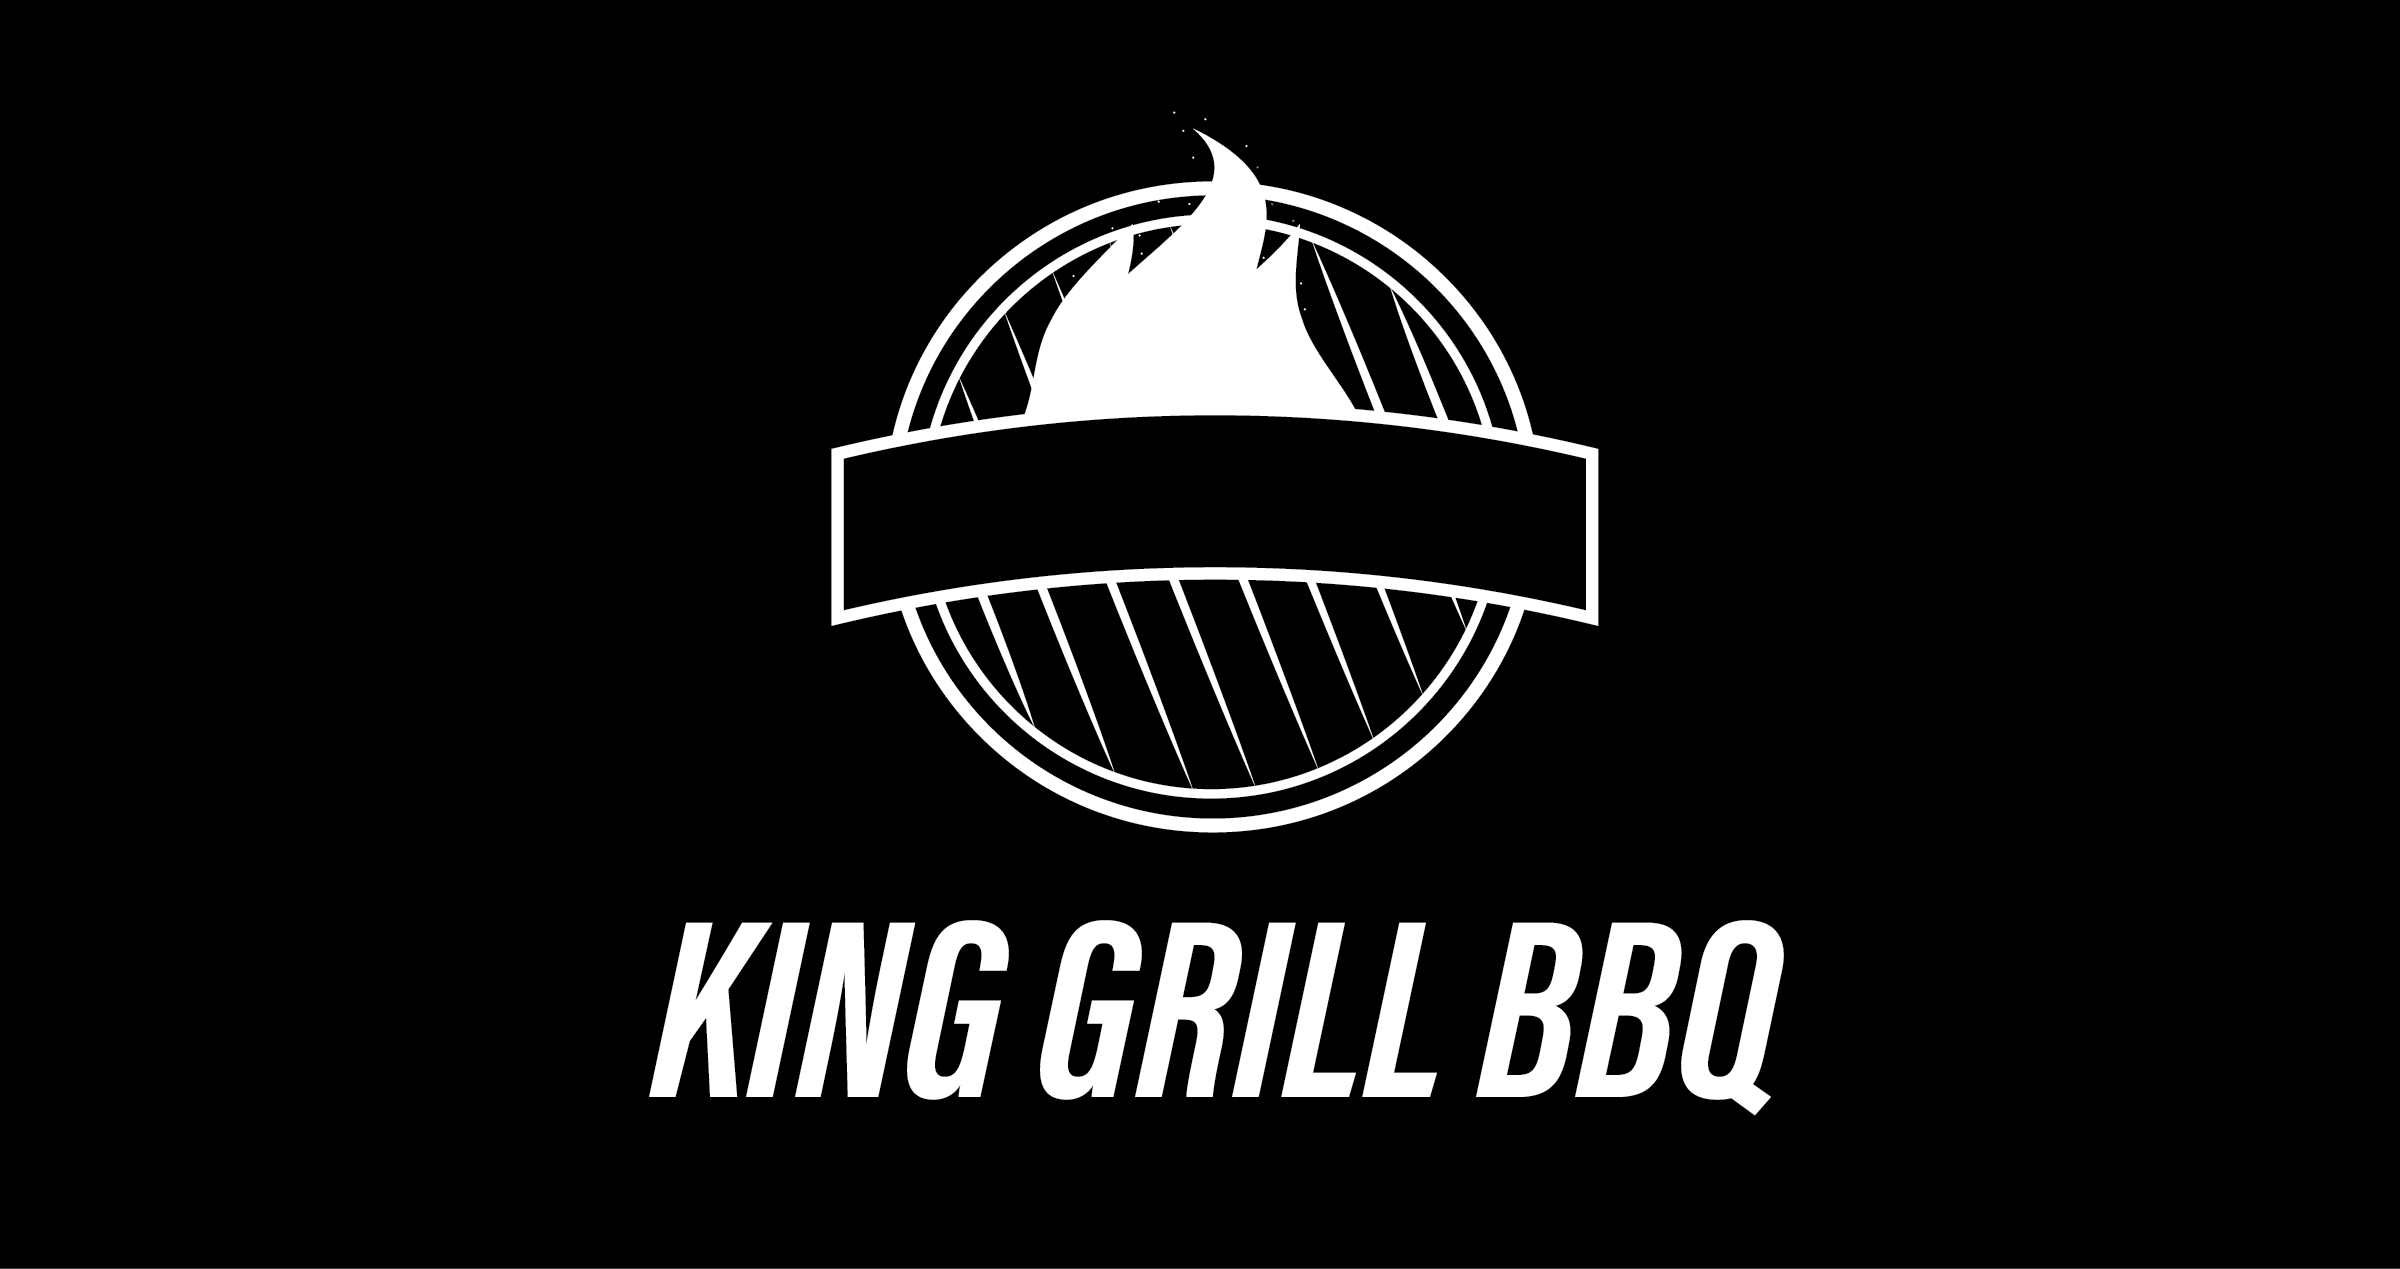 KING GRILL